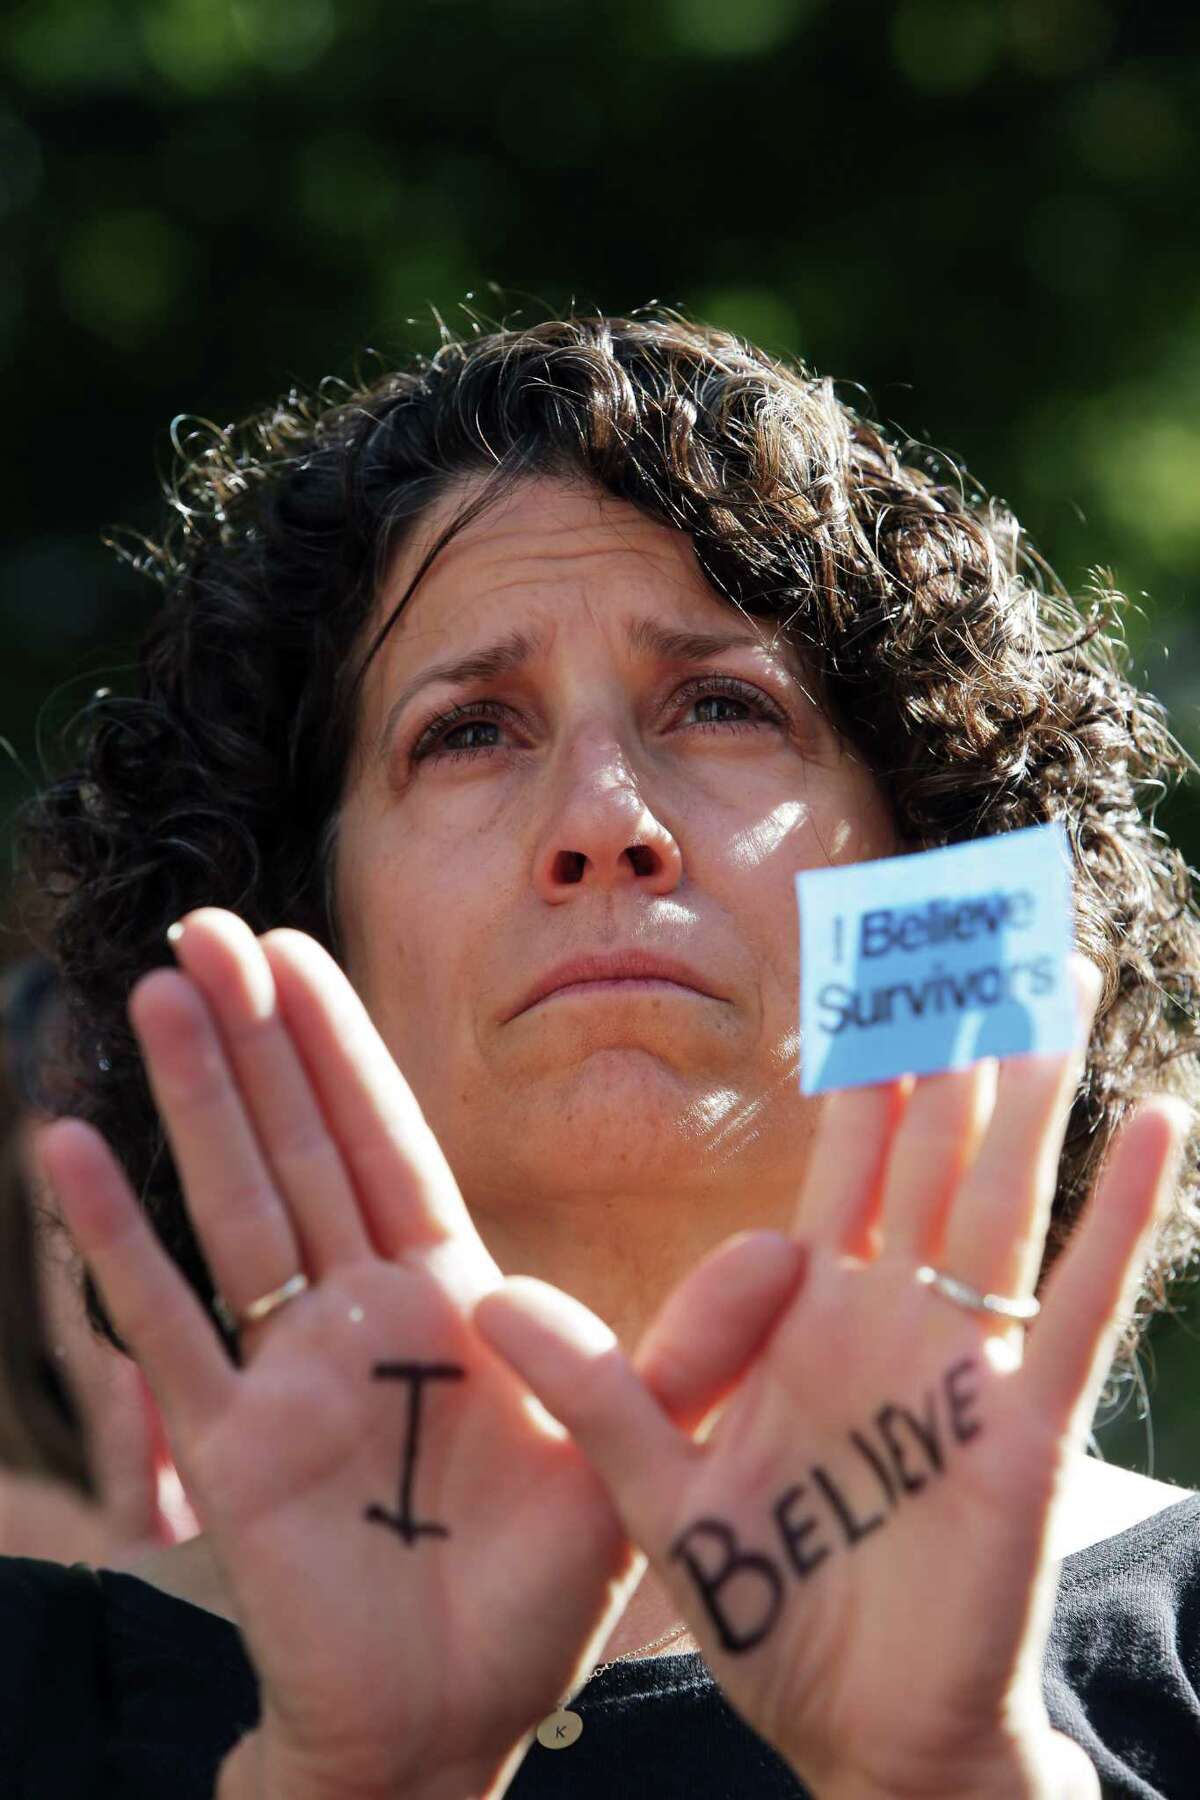 Karen Baer raises her hands with the words "I Believe" written on them as several dozen people gathered at Westlake Park at noon last week to show their support for Dr. Christine Blasey Ford as she testified in a Senate hearing about her sexual assault allegations against Supreme Court nominee Brett Kavanaugh, Sept. 27, 2018. Many of the people gathered had experienced sexual assault themselves and shared their stories. The event ended with a minute of silence in honor of victims of sexual violence.